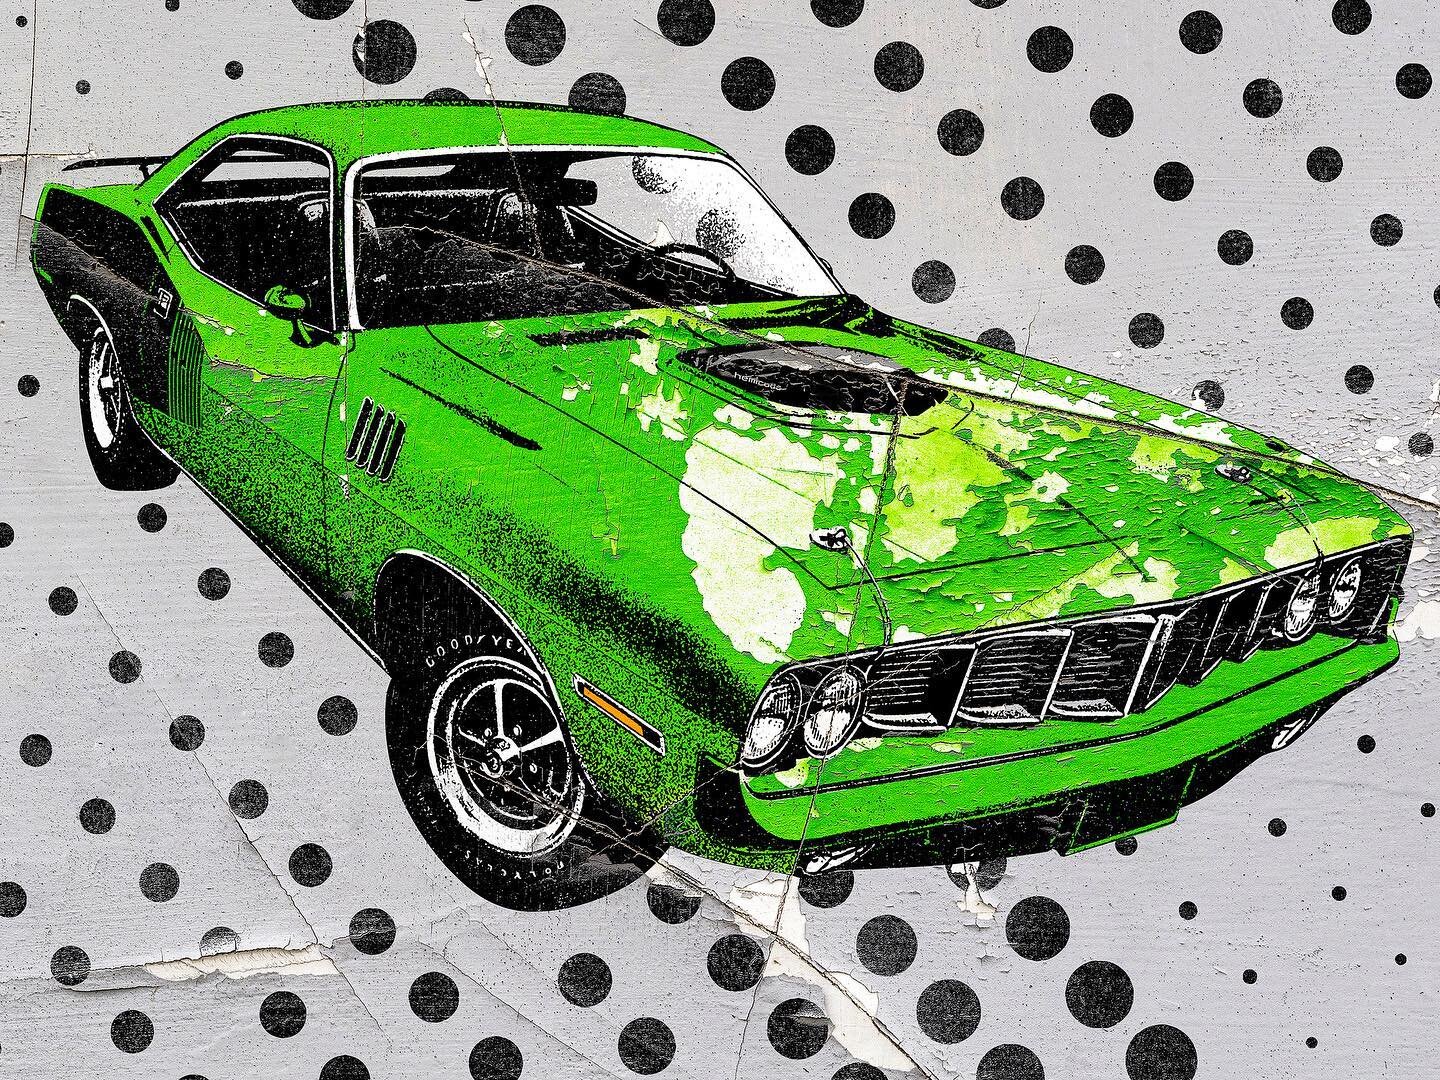 &ldquo;Hemi-sweet.&rdquo;

The iconic 1971, 425 HP Hemi &lsquo;Cuda coated in &ldquo;Sassy Grass&rdquo; green.

This custom automotive art and other machines just like it are available either as a 17&rdquo;x 22&rdquo; archival print or as a 45&rdquo;